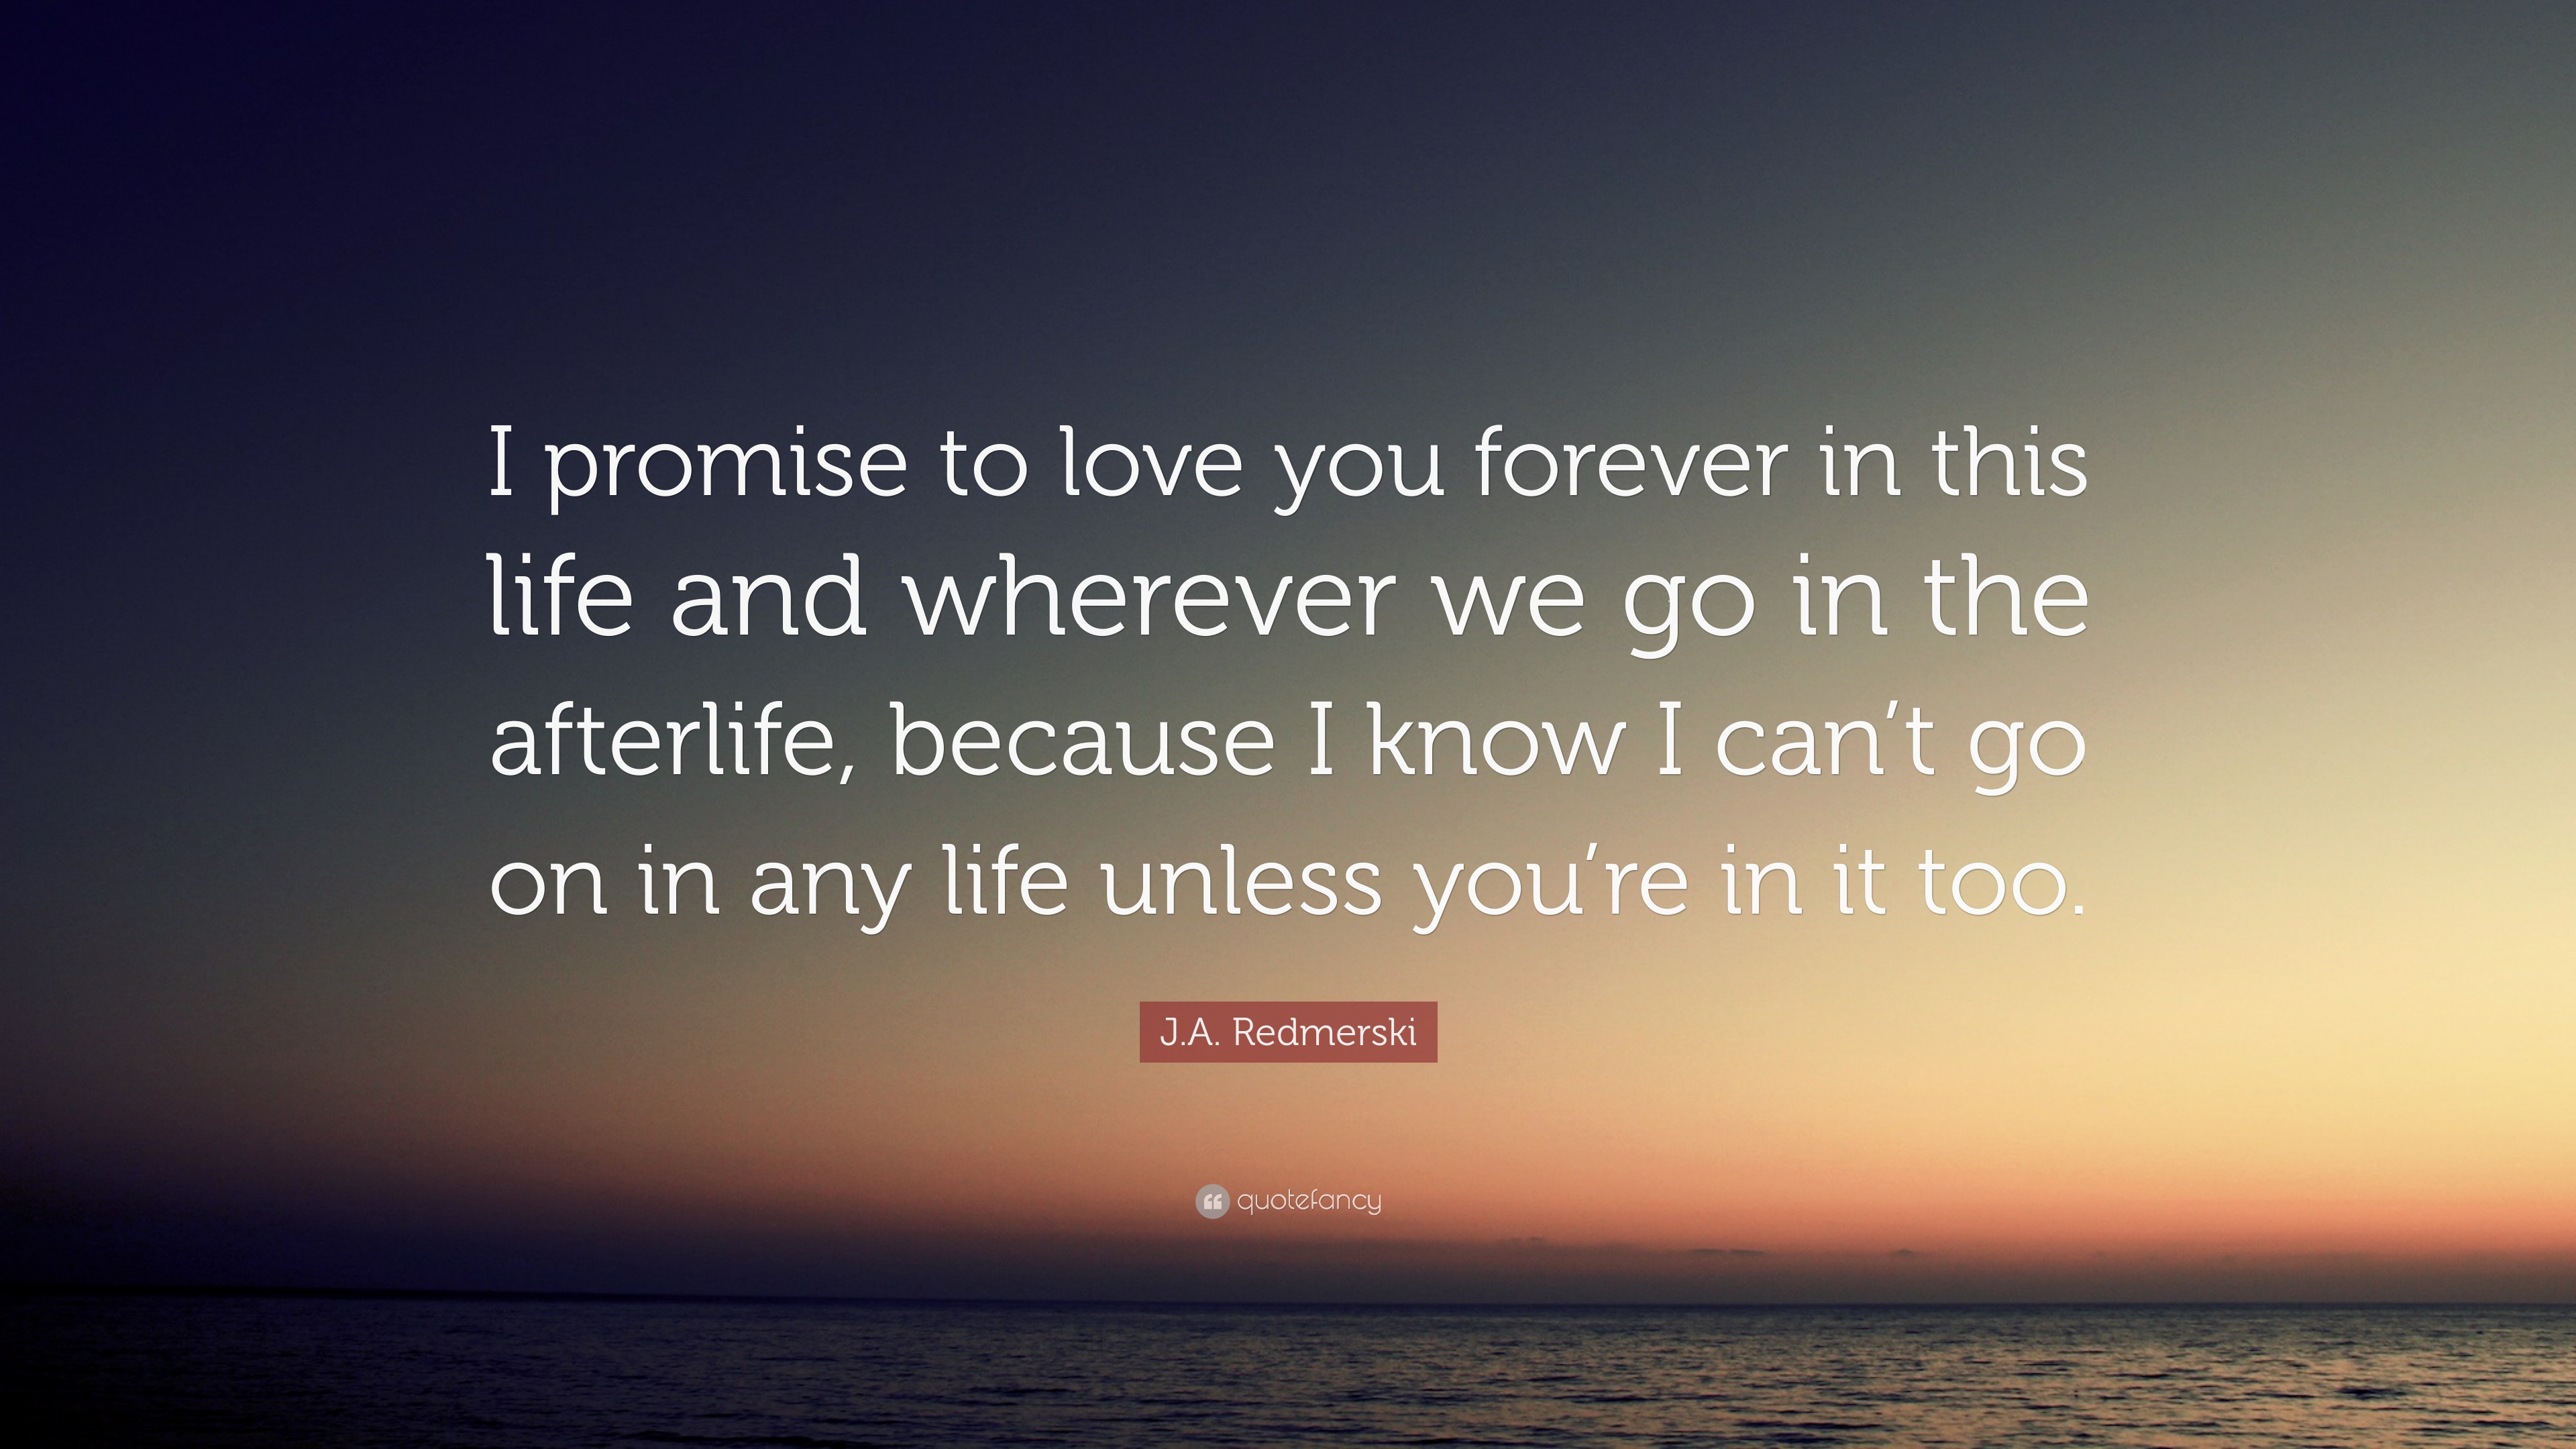 J A Redmerski Quote I Promise To Love You Forever In This Life And Wherever We Go In The Afterlife Because I Know I Can T Go On In Any Life 7 Wallpapers